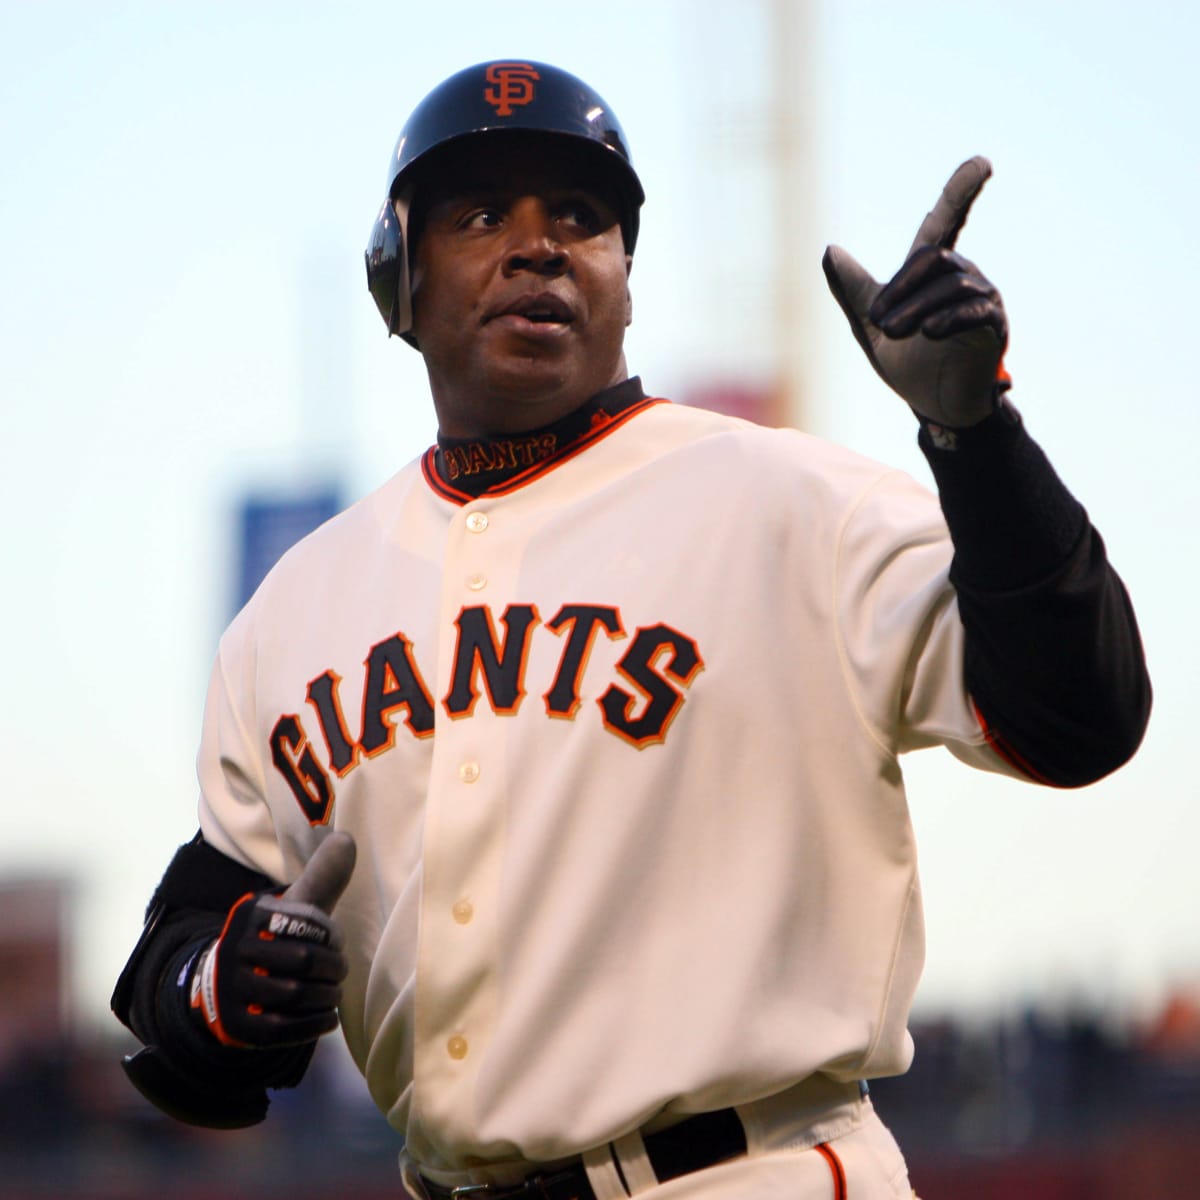 SF Giants legend Barry Bonds speaks about Hall of Fame shunning